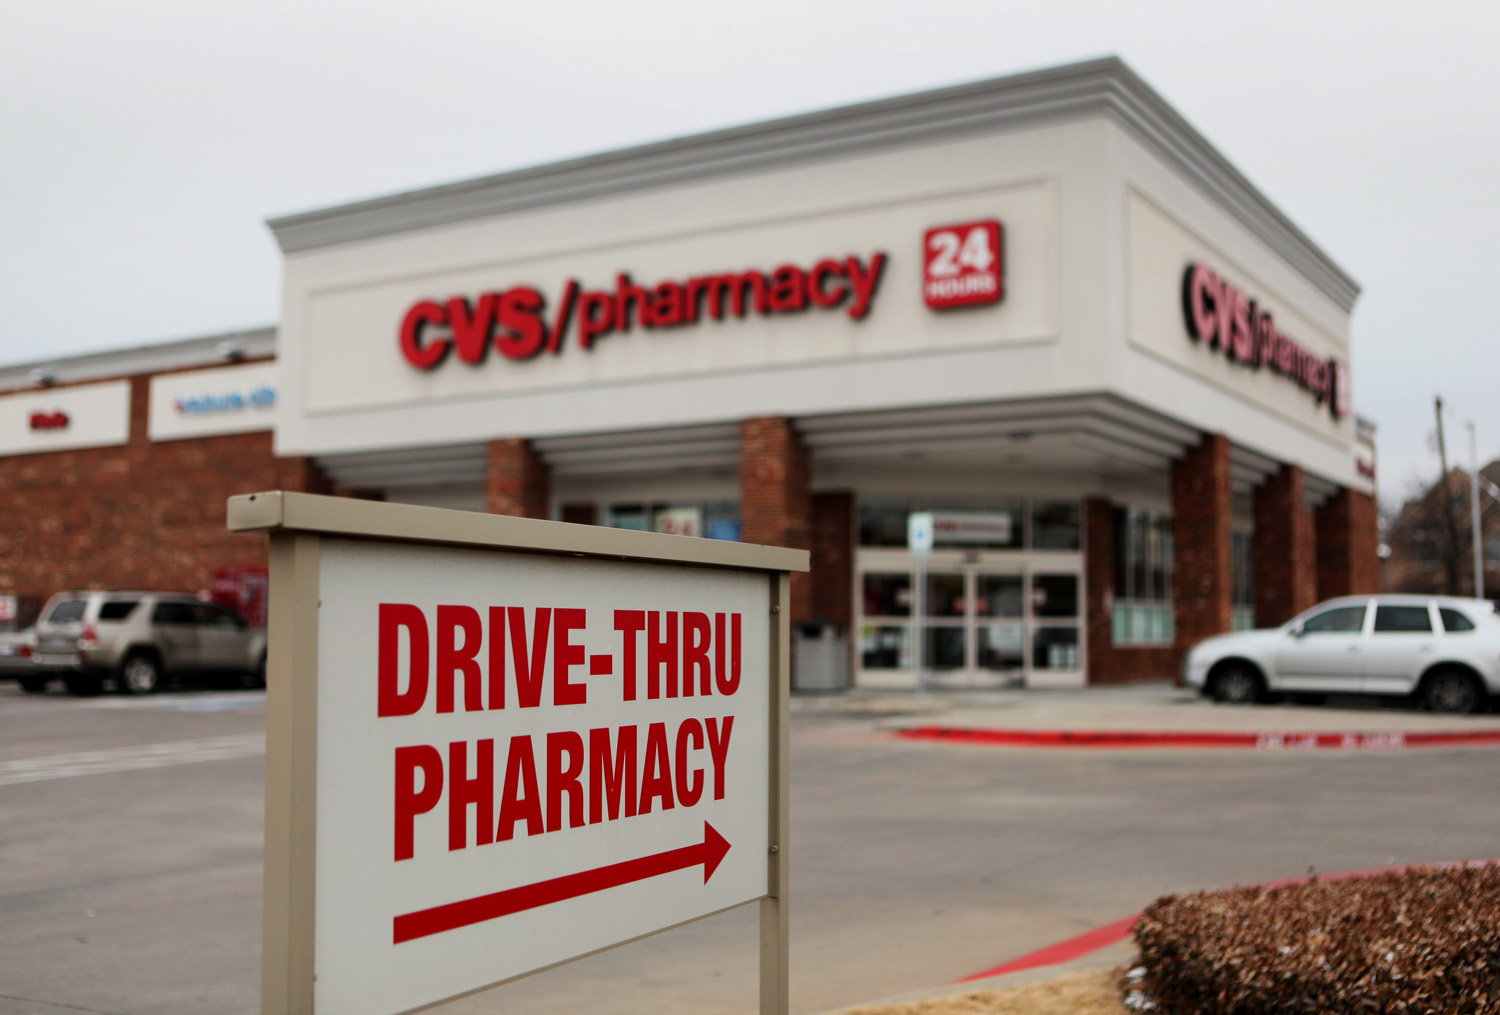 Stocks rose for CVS less than a week after announcing they would not be selling tobacco products anymore. 